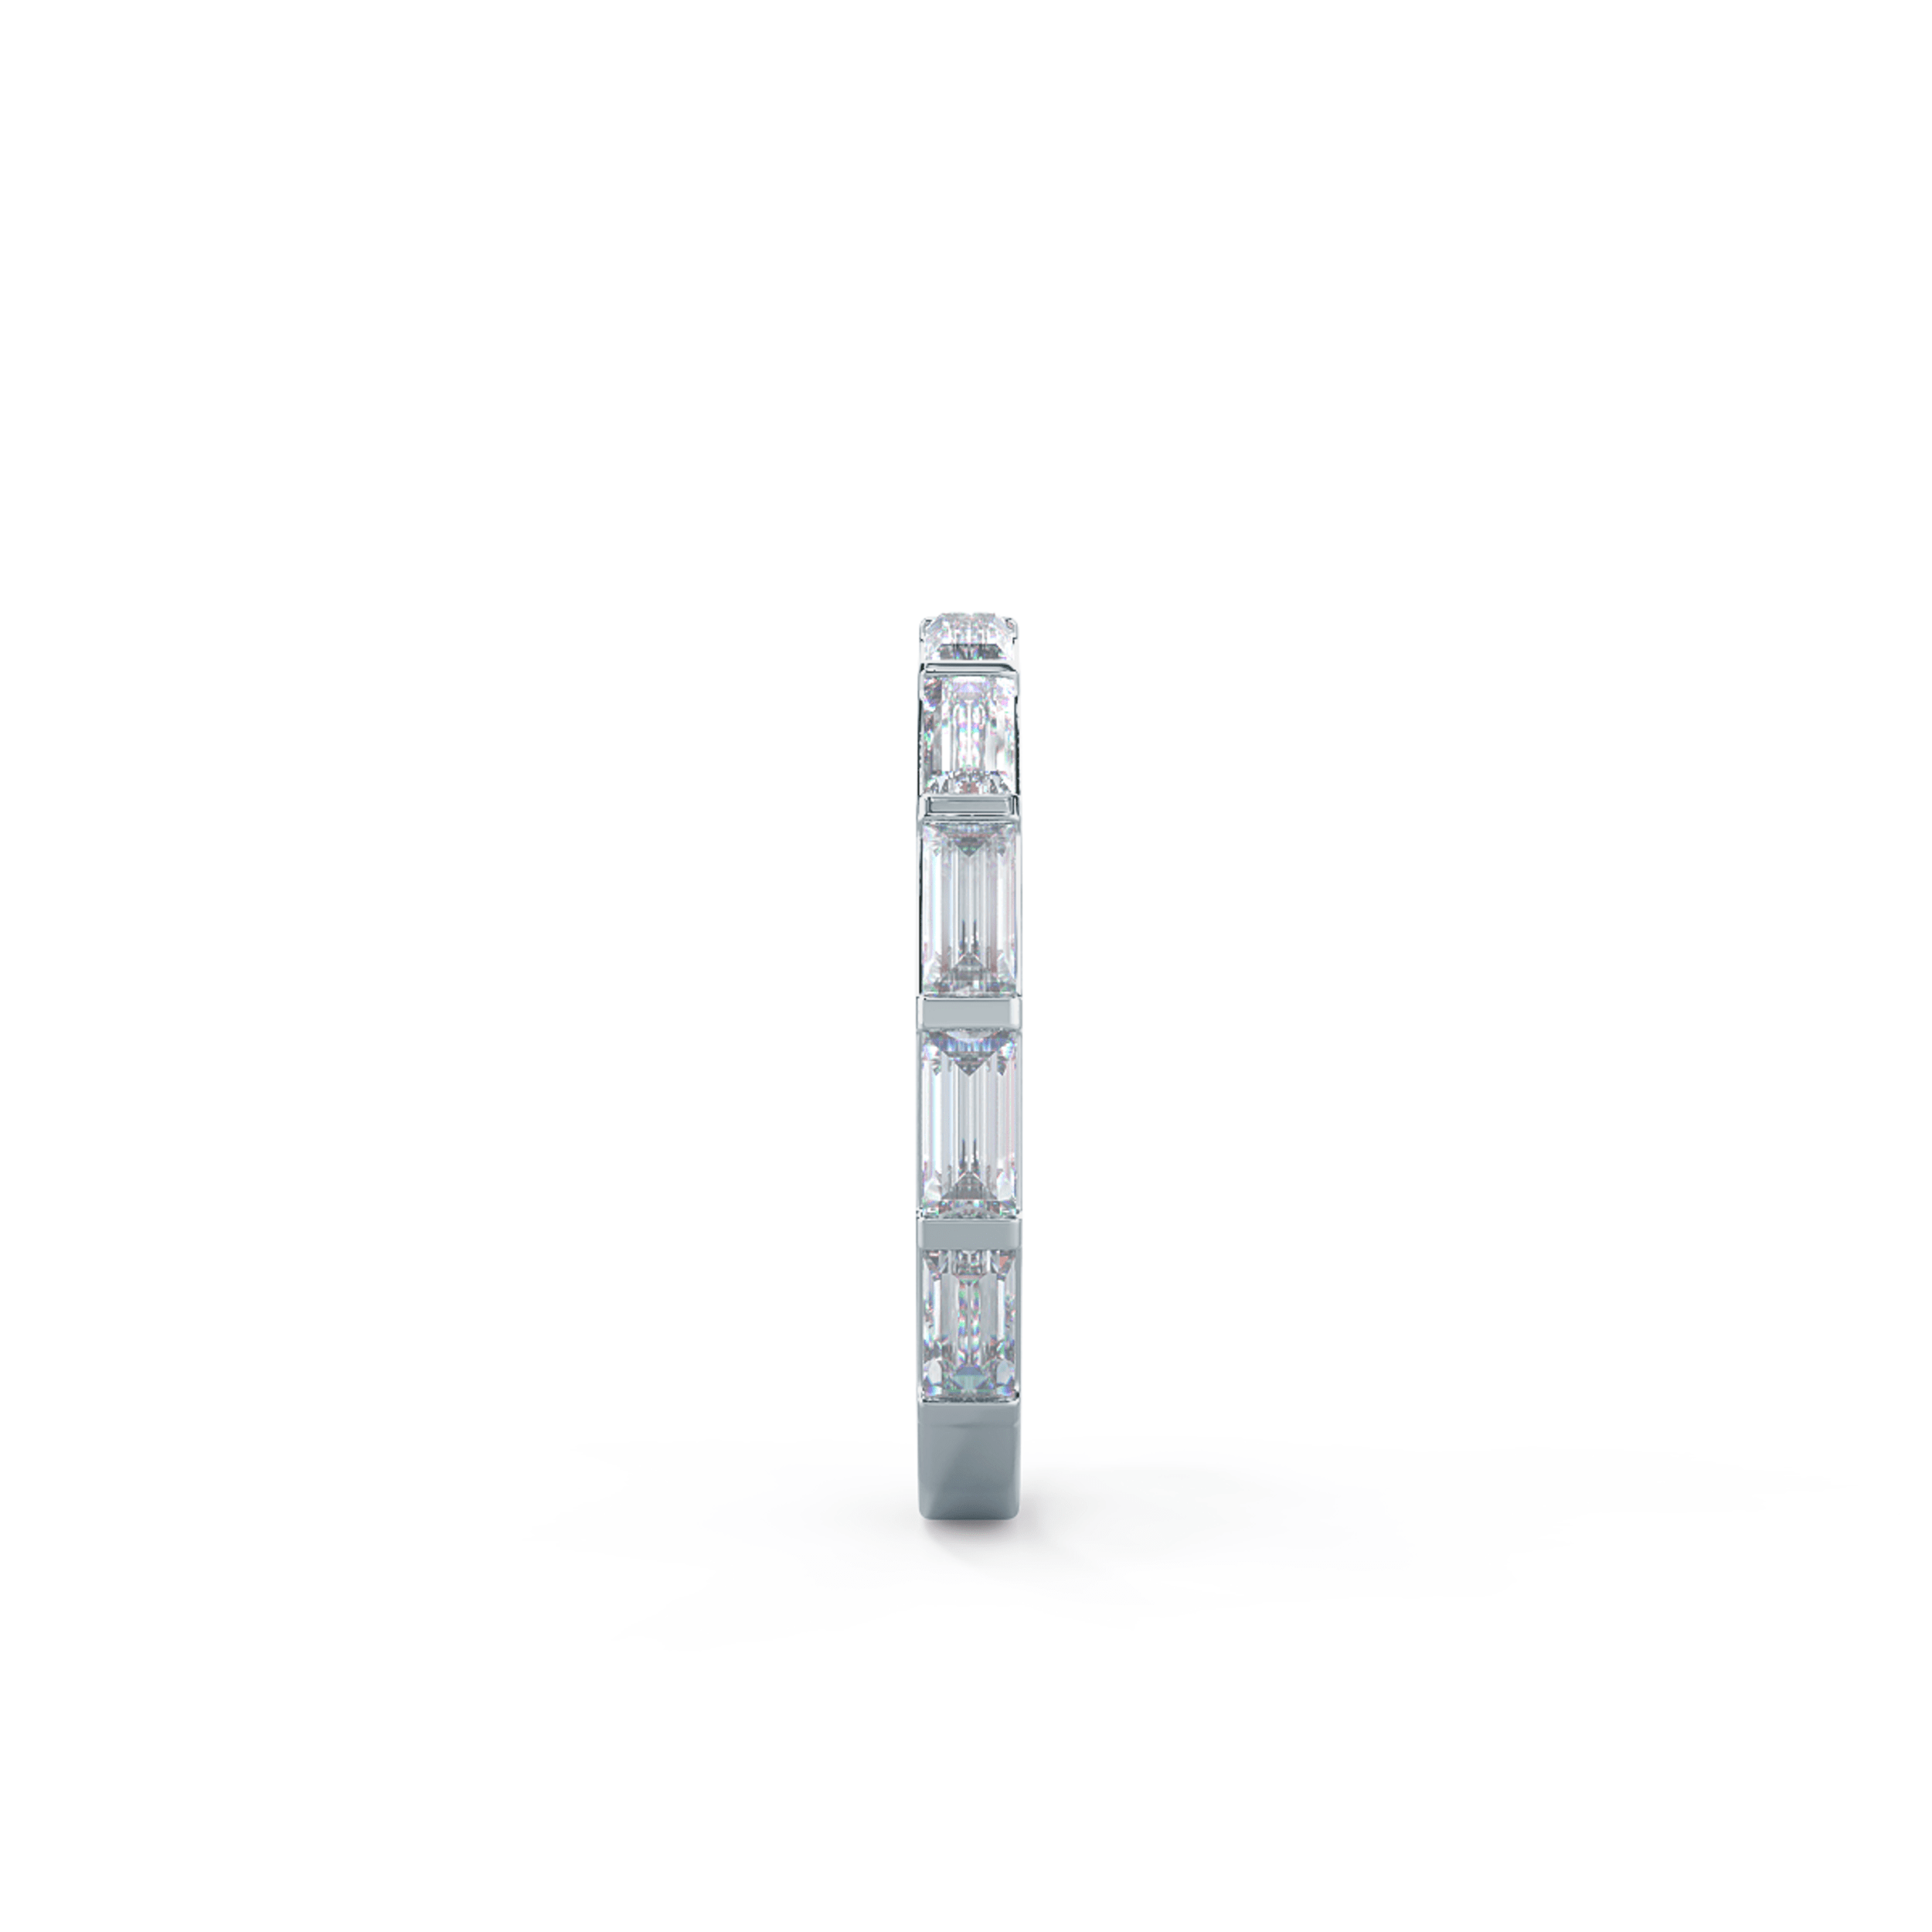 Hand Selected 1.1 Carat Diamonds set in 18k White Gold Baguette East-West Three Quarter Band (Side View)